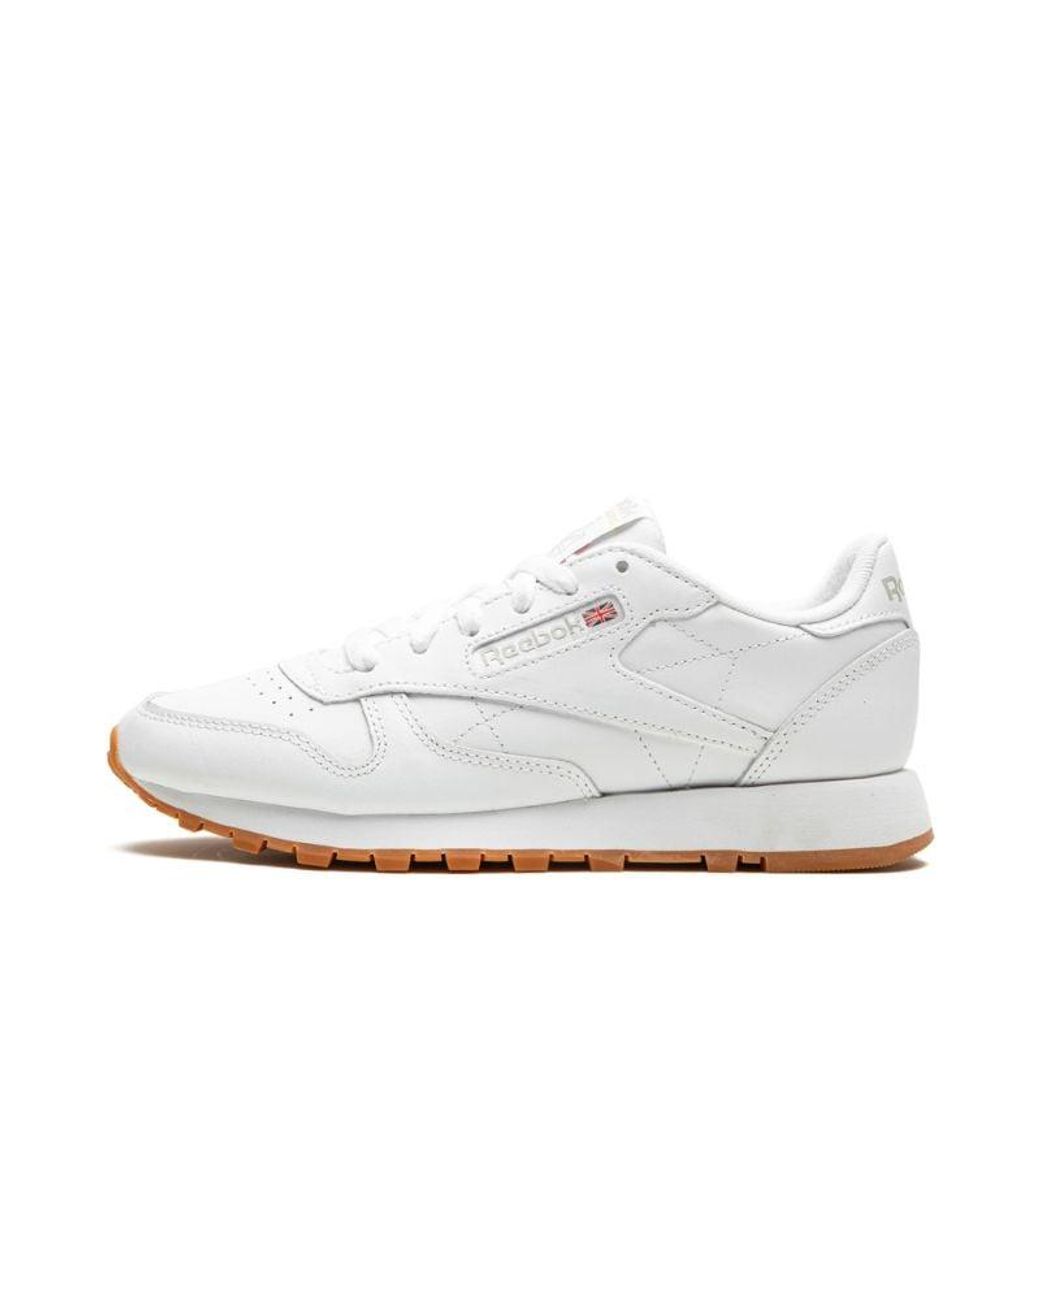 Reebok Classic Leather "white" Shoes | Lyst UK